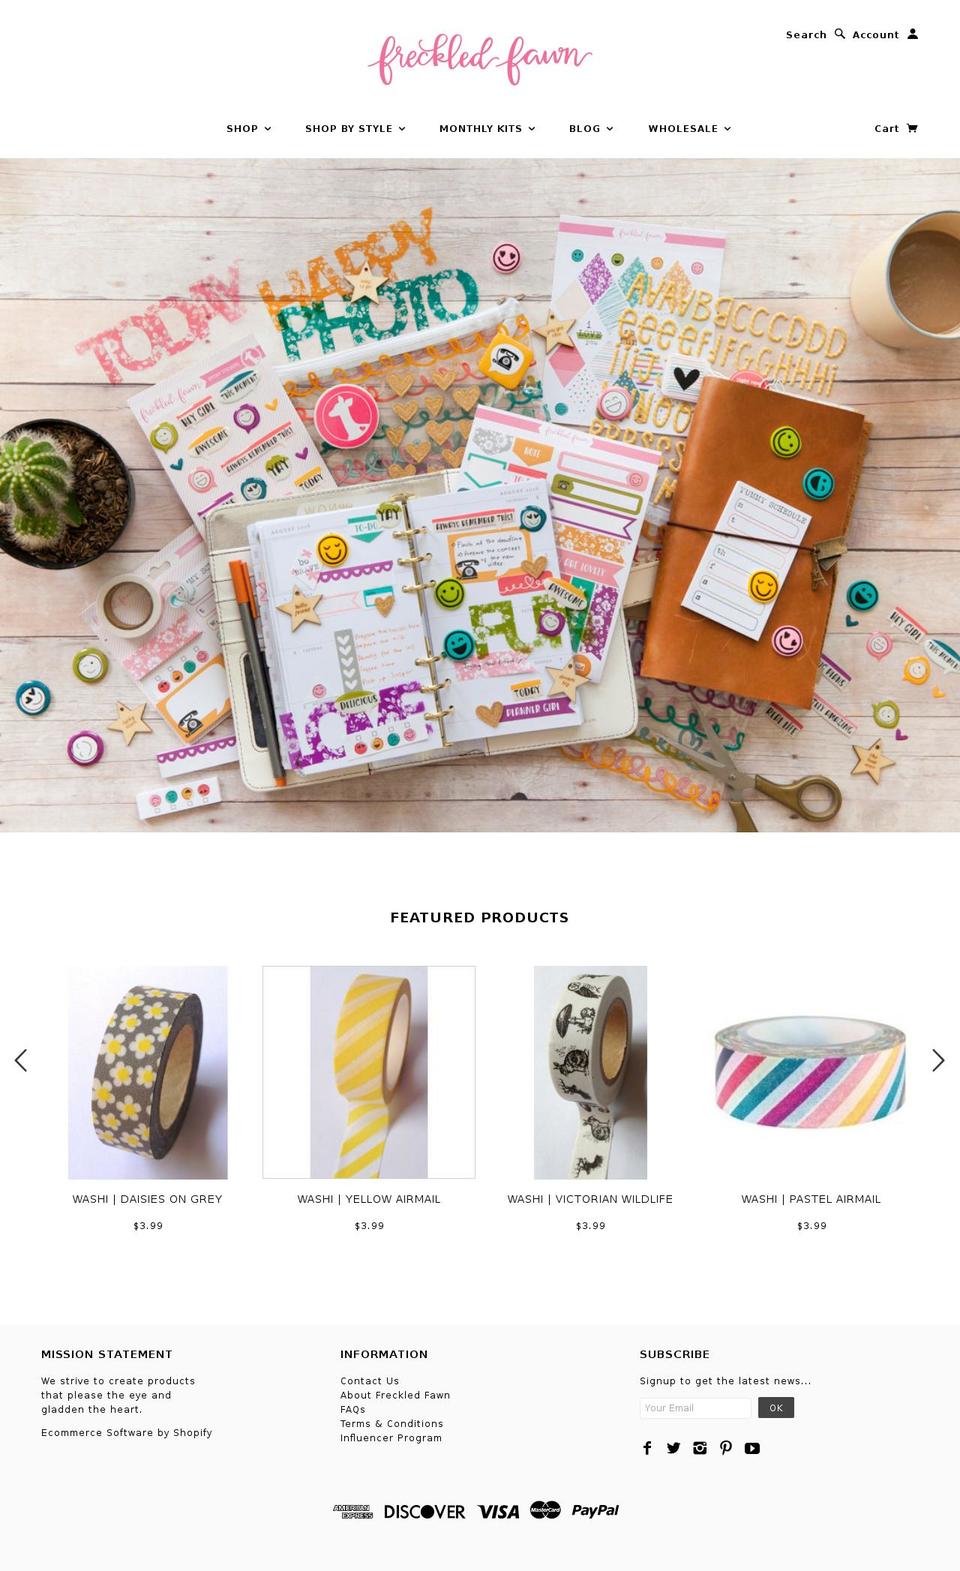 Supply Shopify theme site example freckledfawn.com